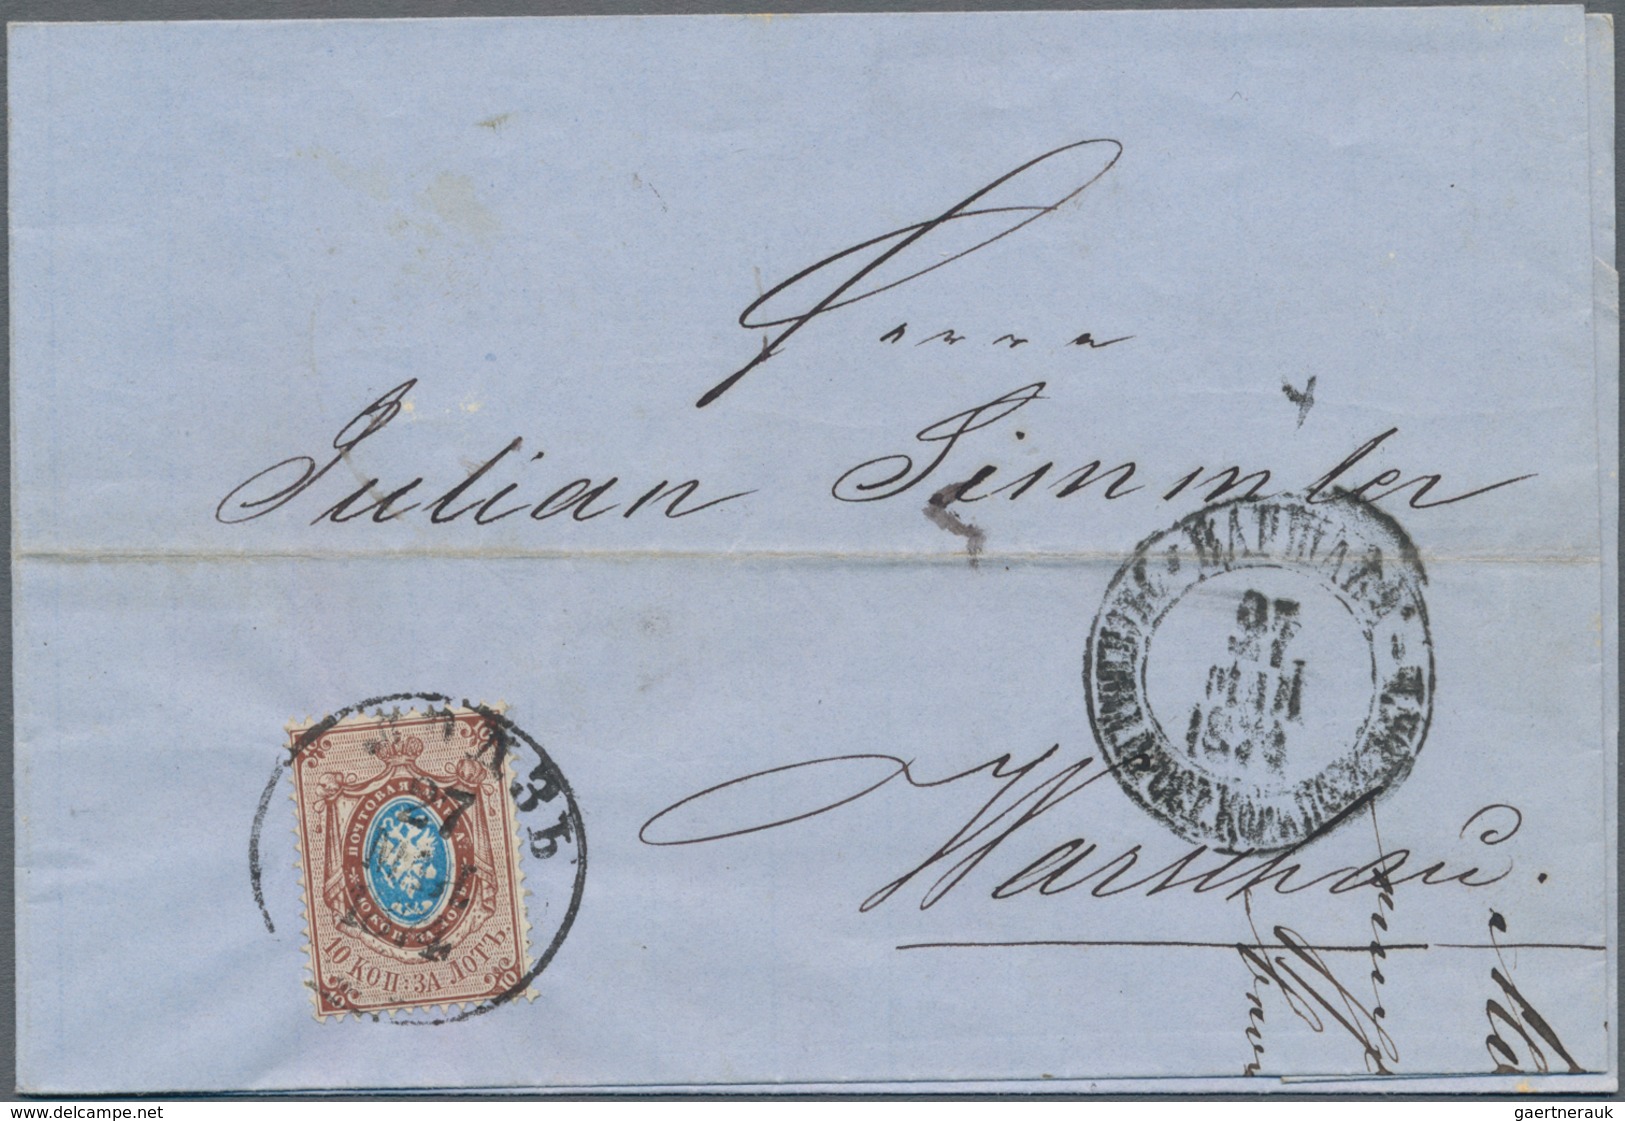 Polen - Russische Periode: 1871/74 five letters all with single franking 10 Kop. brown coat of arms